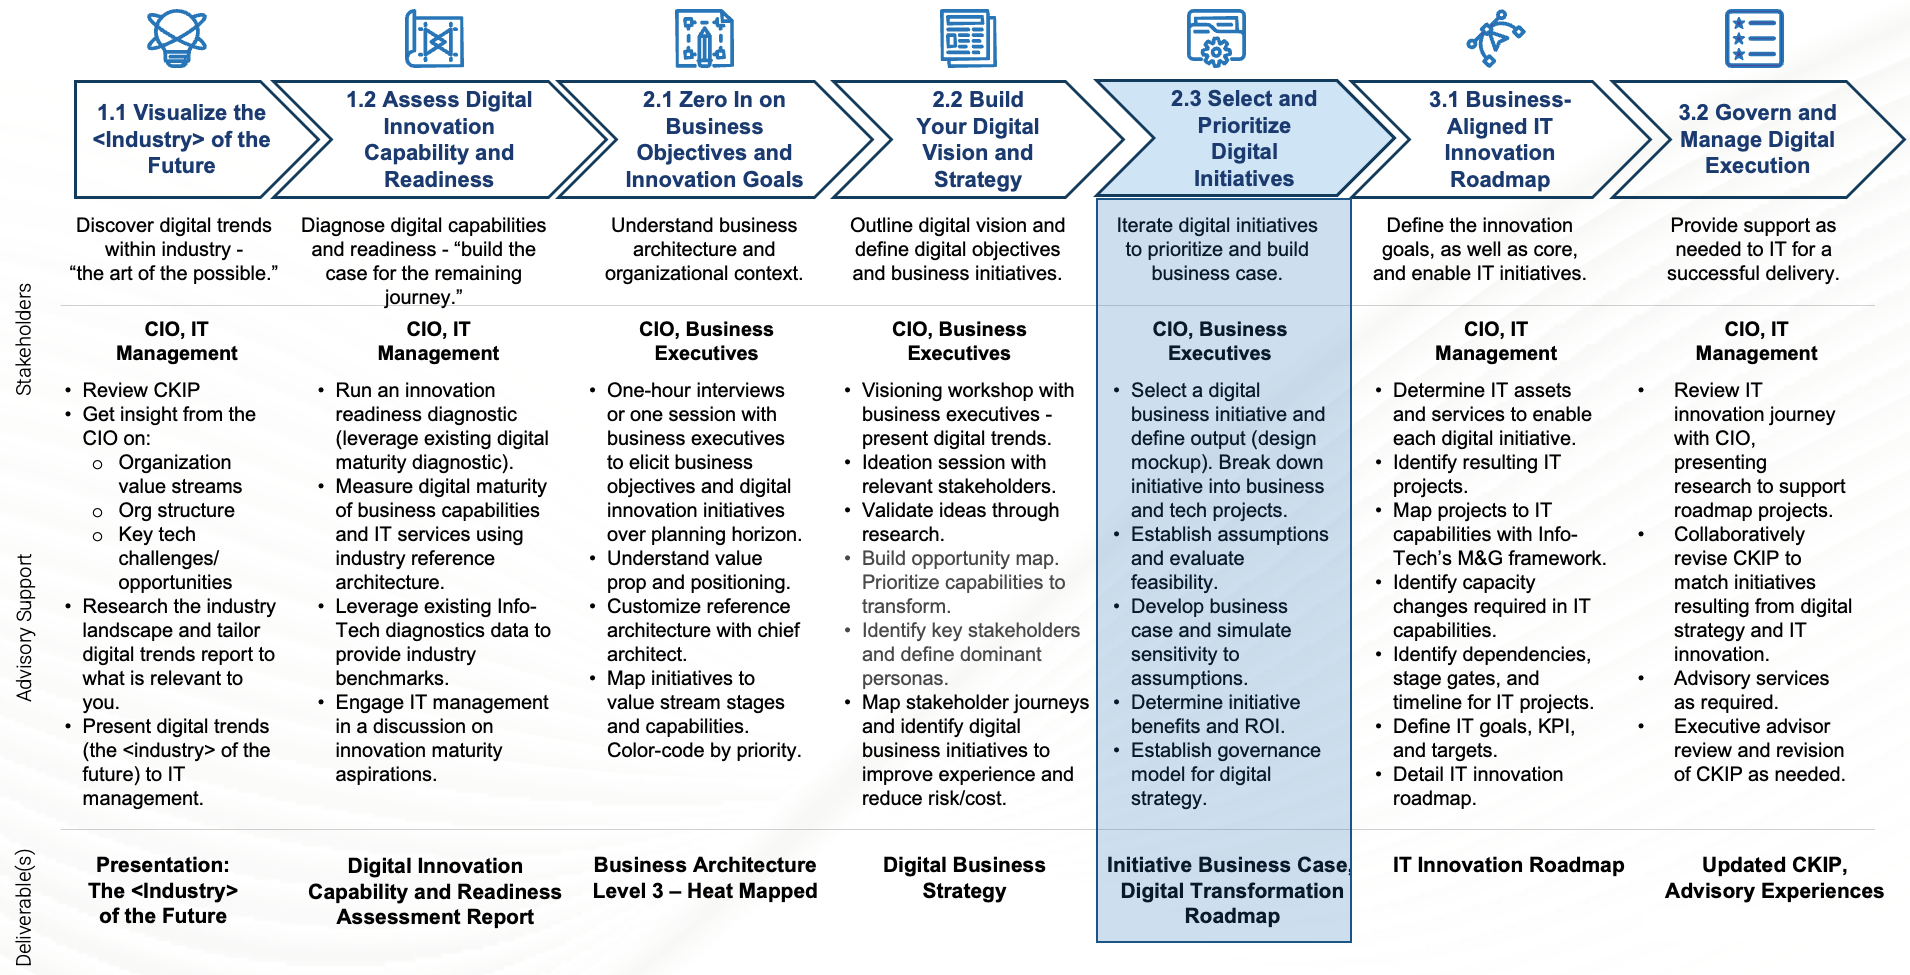 Info-Tech's digital transformation journey for industry members. Table shows the stakeholders, advisory support and deliverables for each industry members